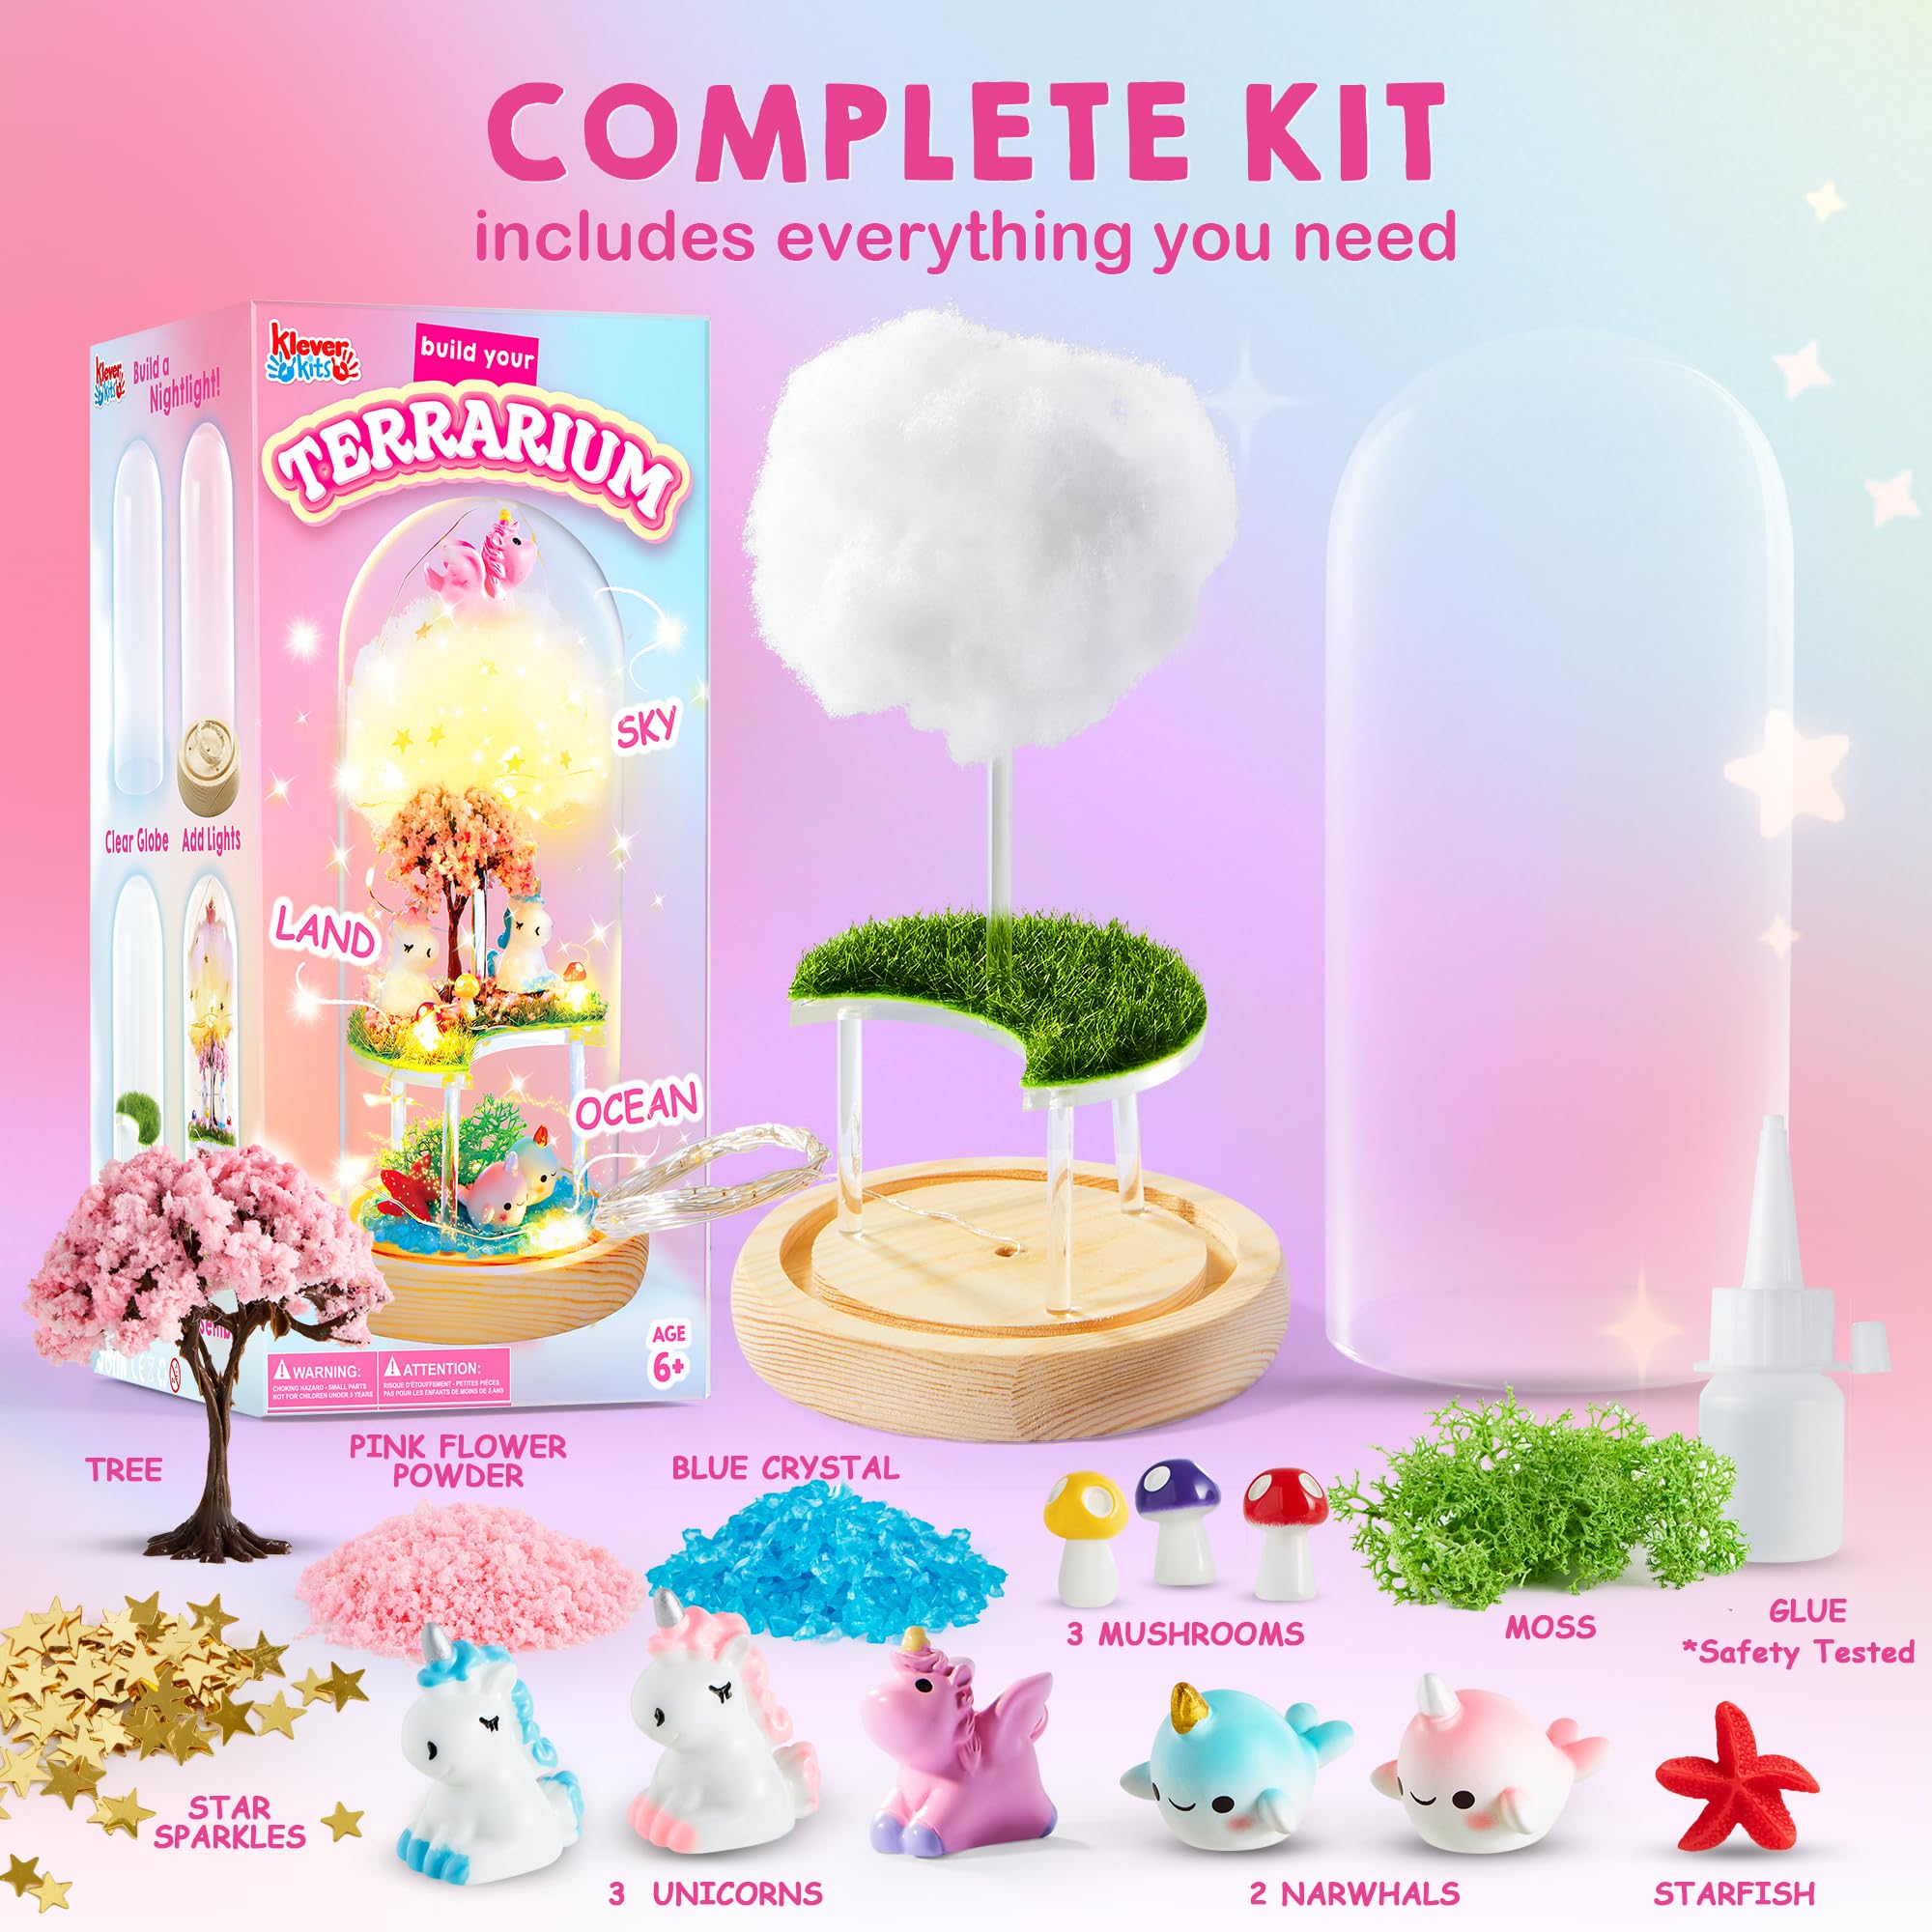 Make Your Own Unicorn Night Light - Birthday Crafts Gifts for Girls Kids, Unicorns Terrarium Kit for Kids, 3-in-1 Unicorn Toys Presents, Kawaii Arts and Crafts for Kids Age 6 7 8-12 Year Old Girl